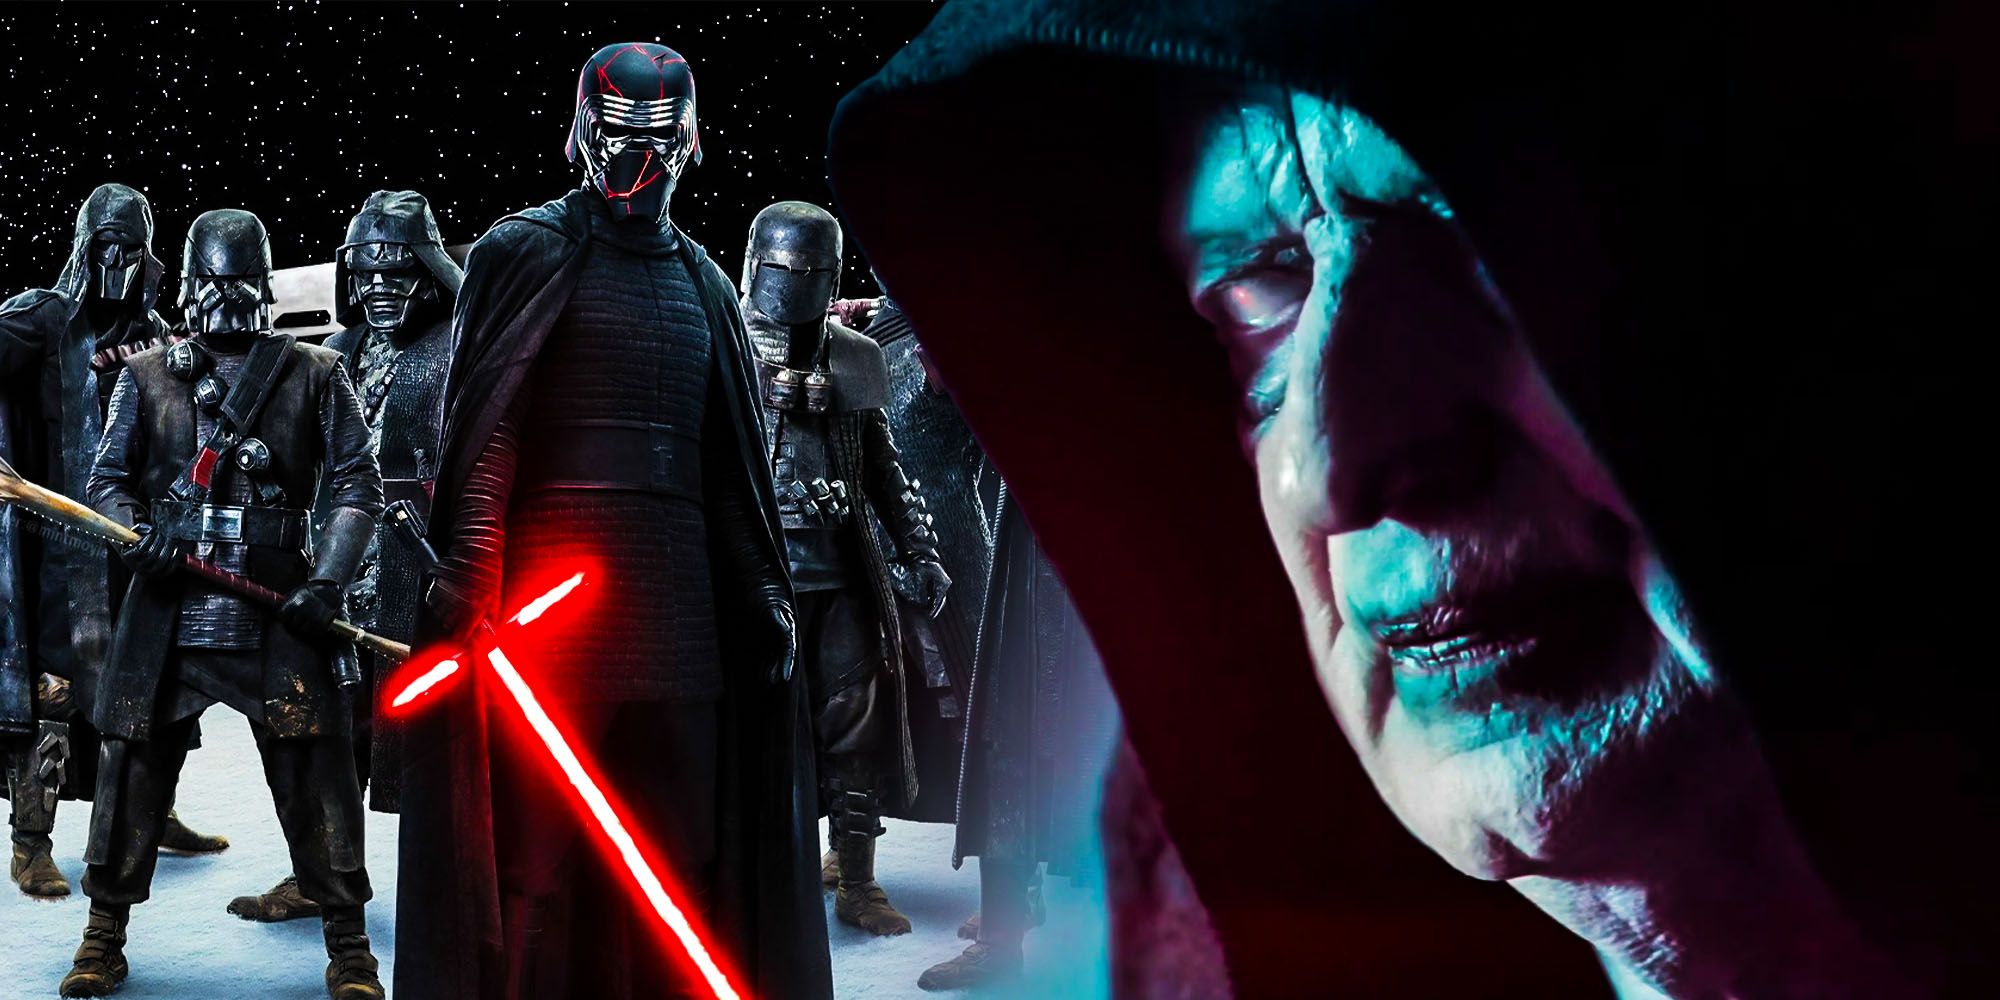 Why The Knights Of Ren Serve Palpatine (Not Kylo) In Rise of Skywalker